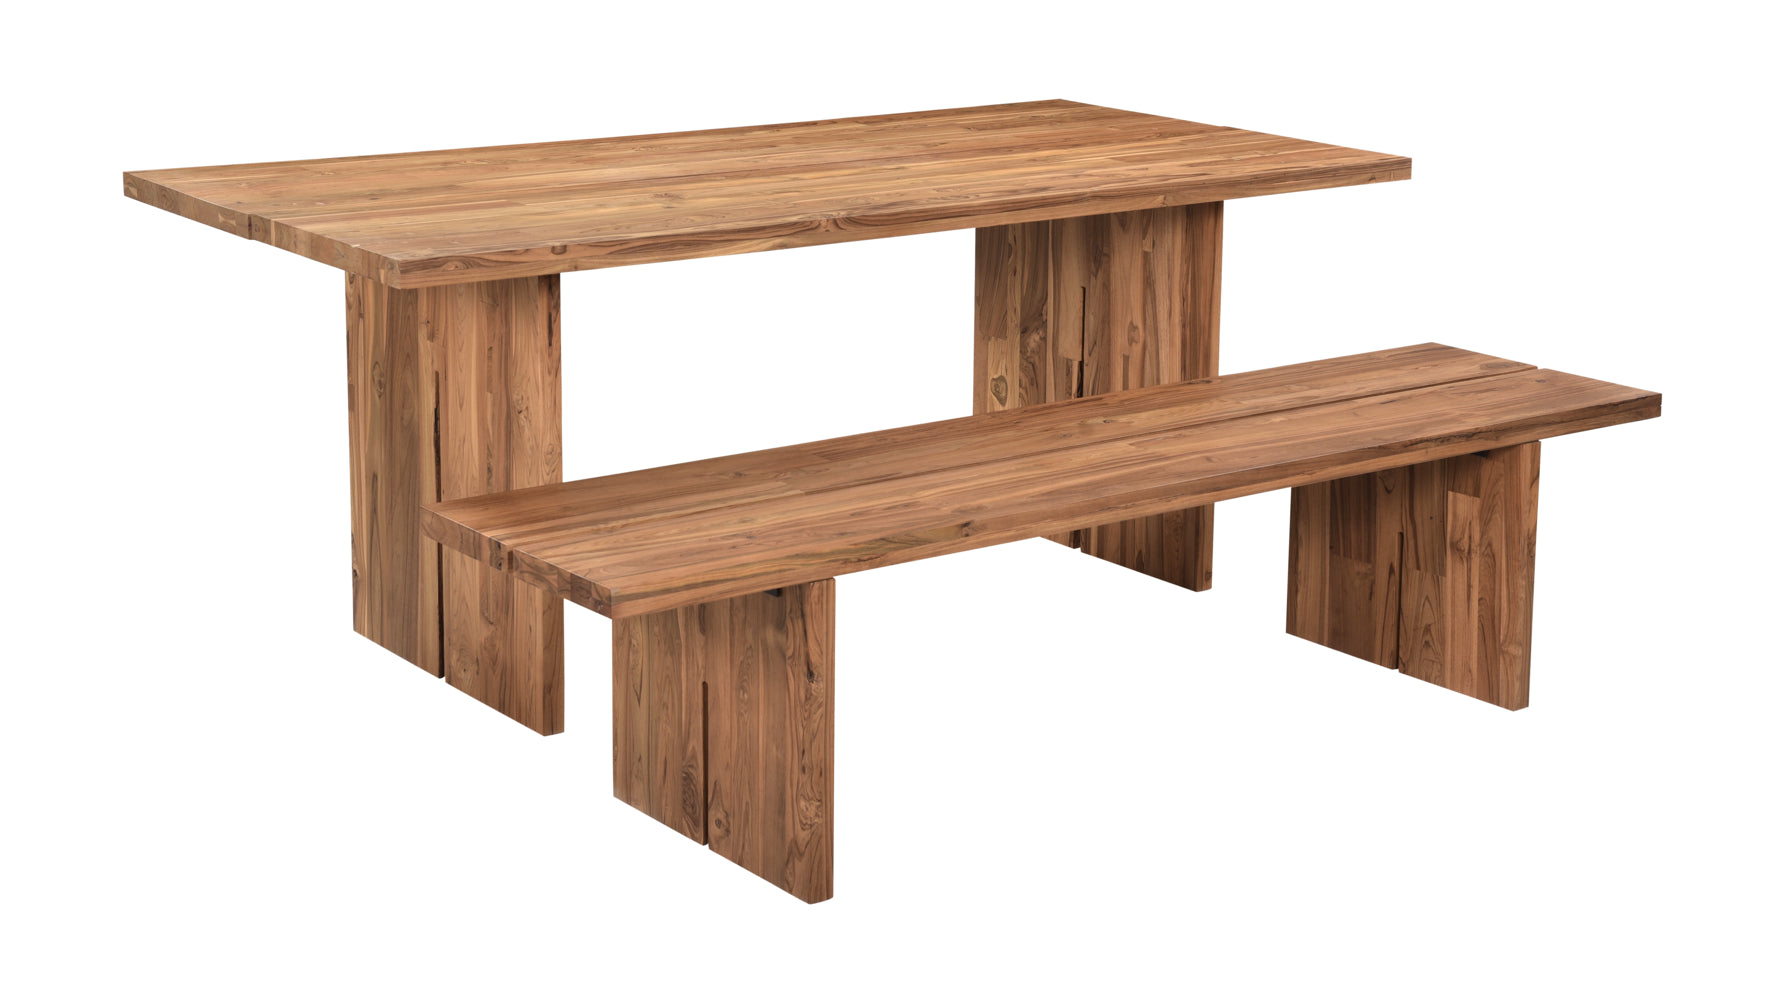 Plane Outdoor Dining Table, Seats 8-10, Teak - Image 5